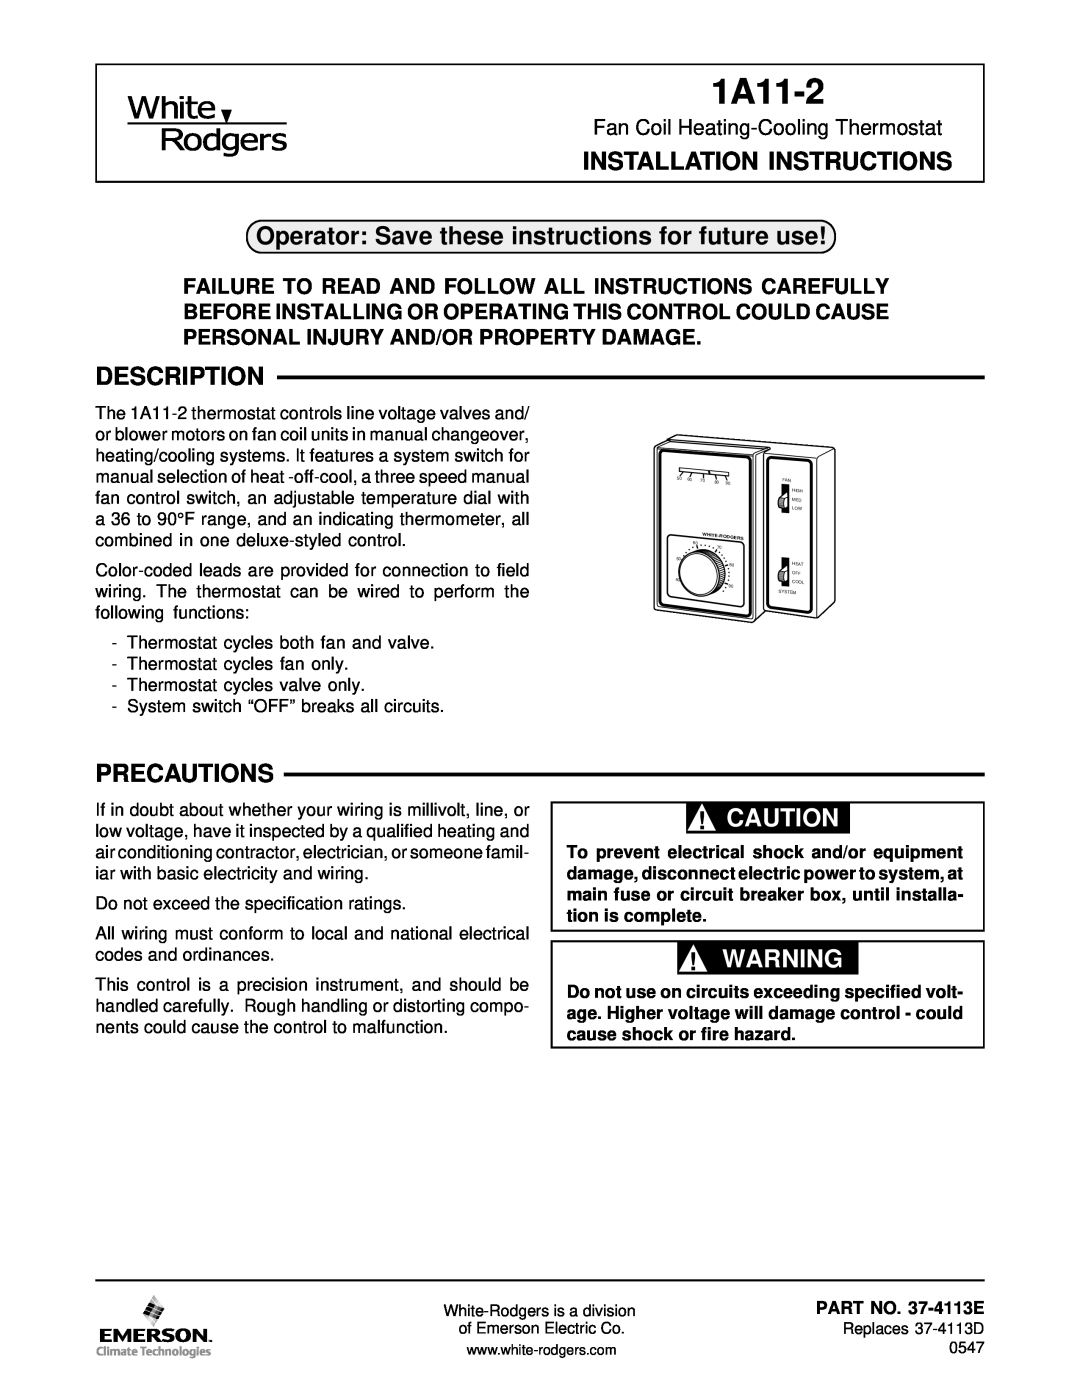 Emerson 1A11-2 installation instructions Installation Instructions, Operator Save these instructions for future use 